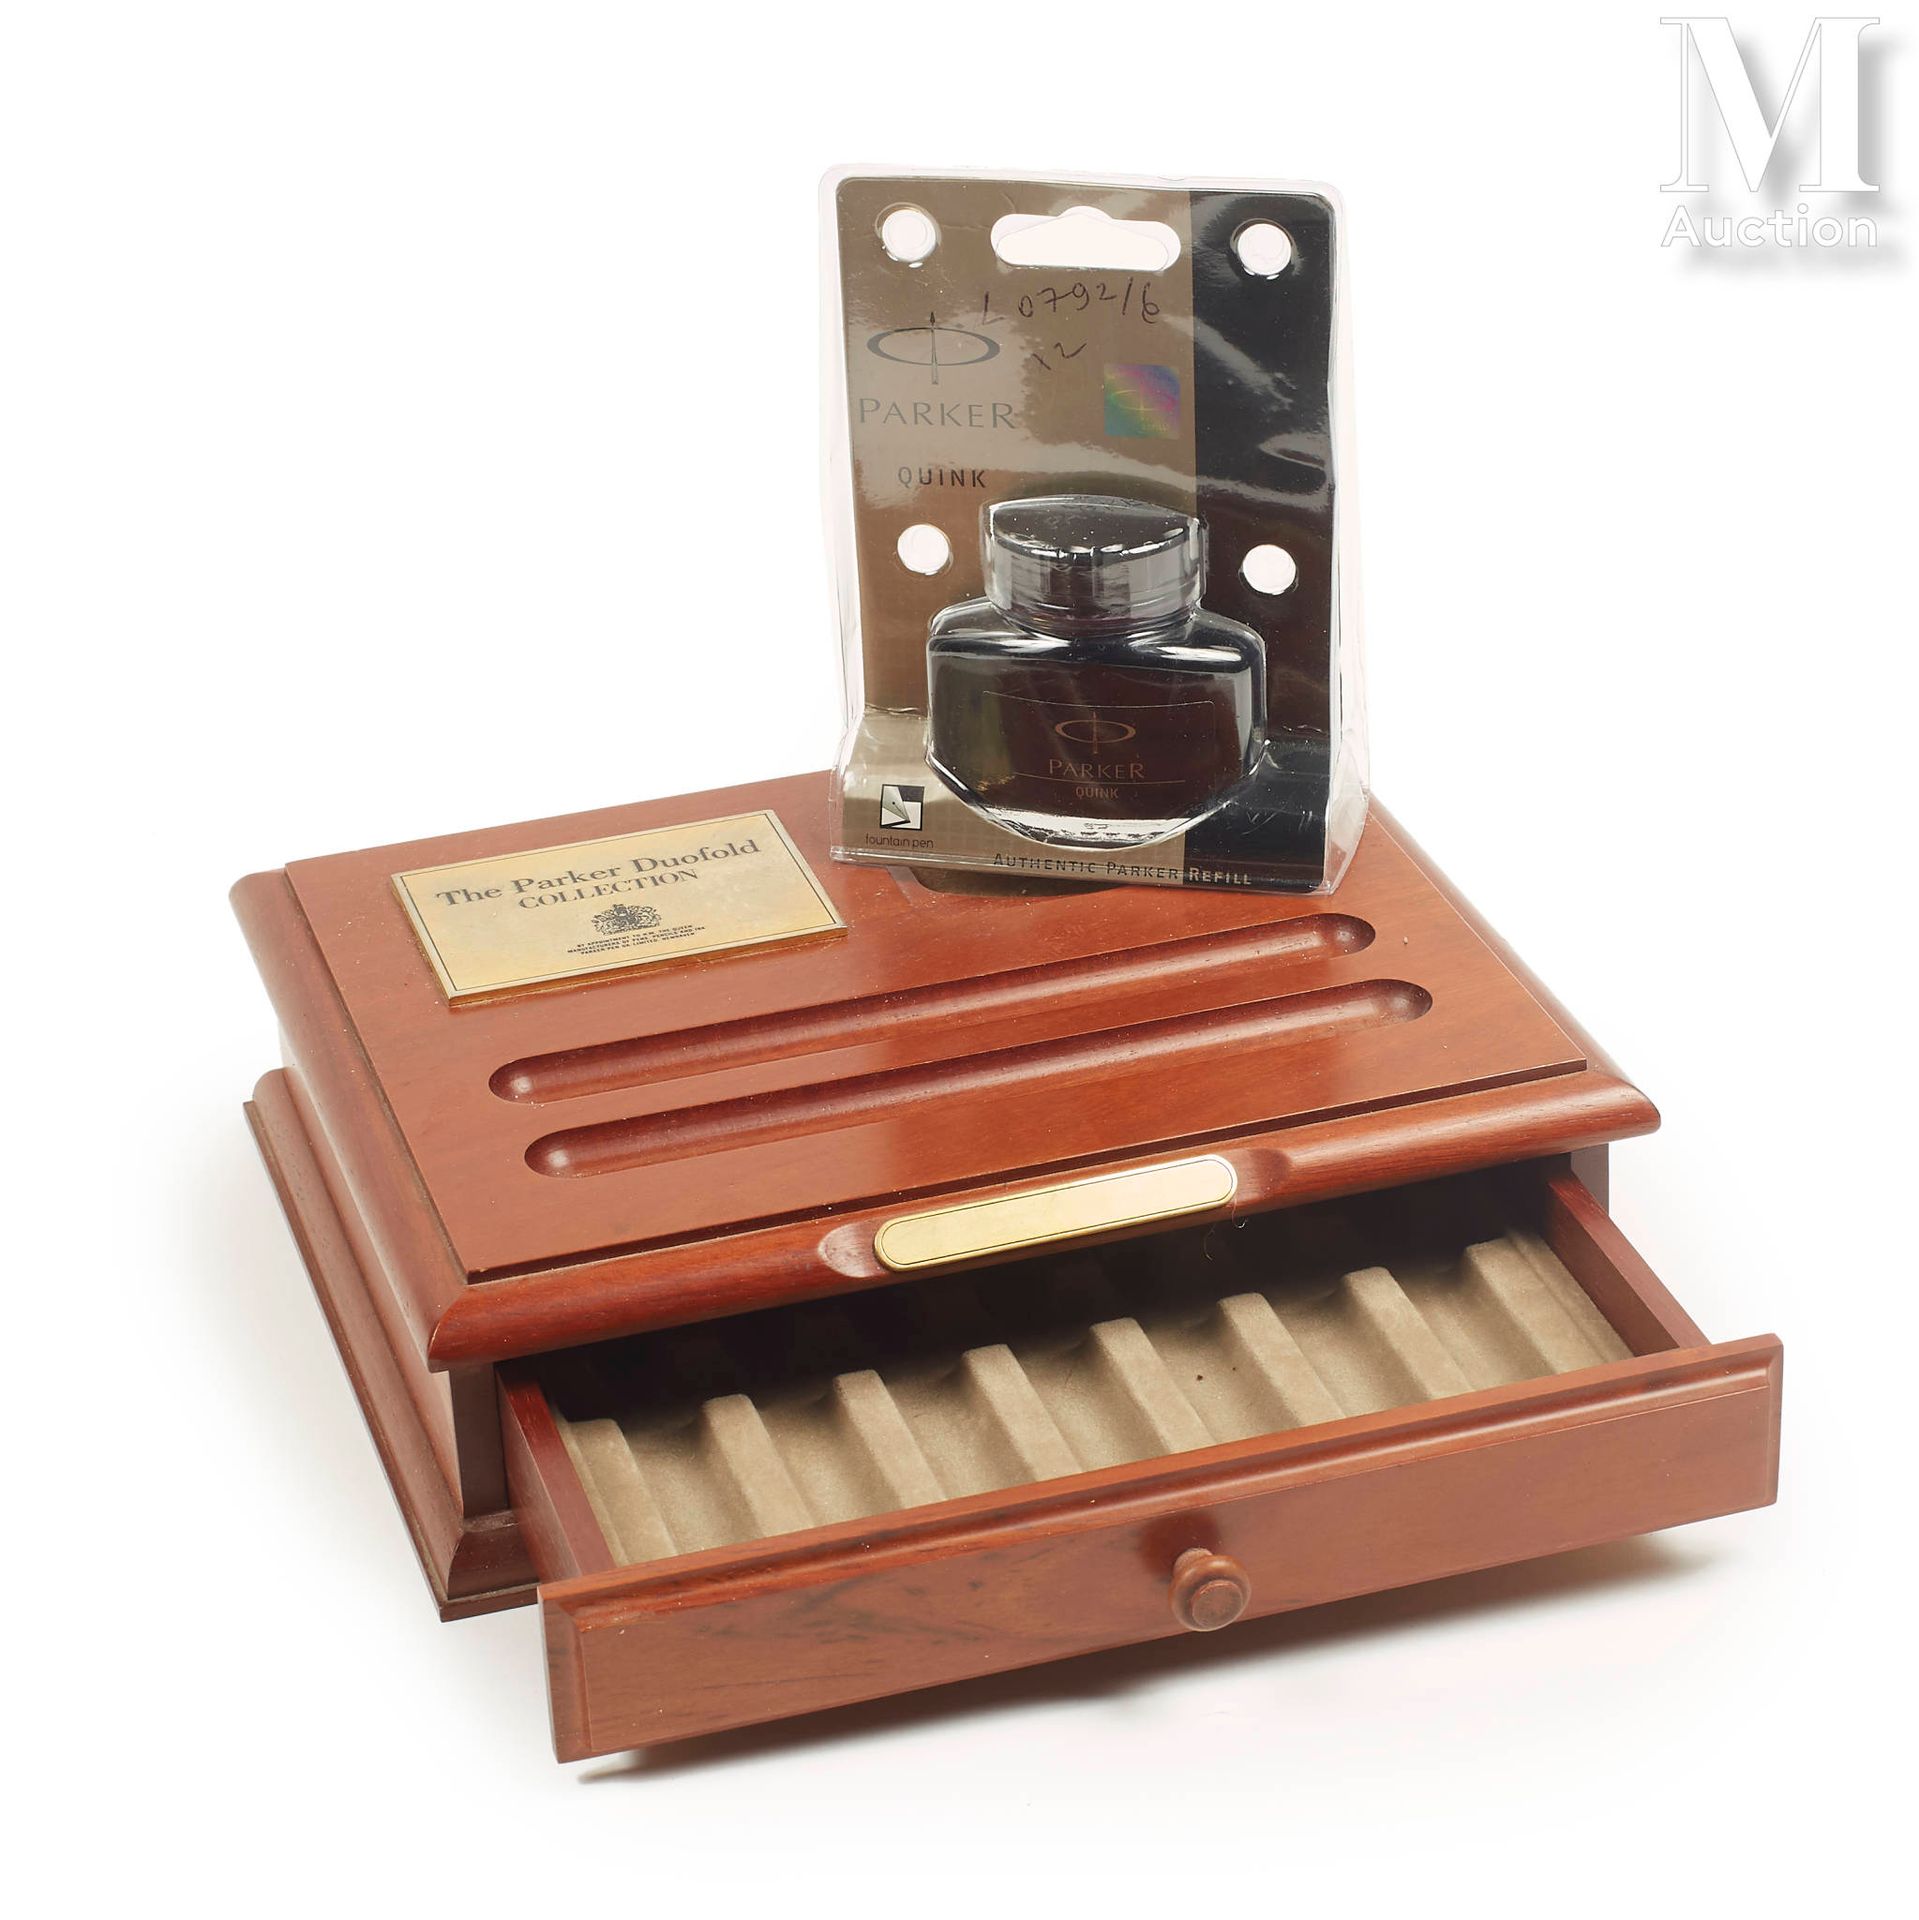 PARKER Wooden box with a drawer that can hold 7 pens, with its ink bottle.